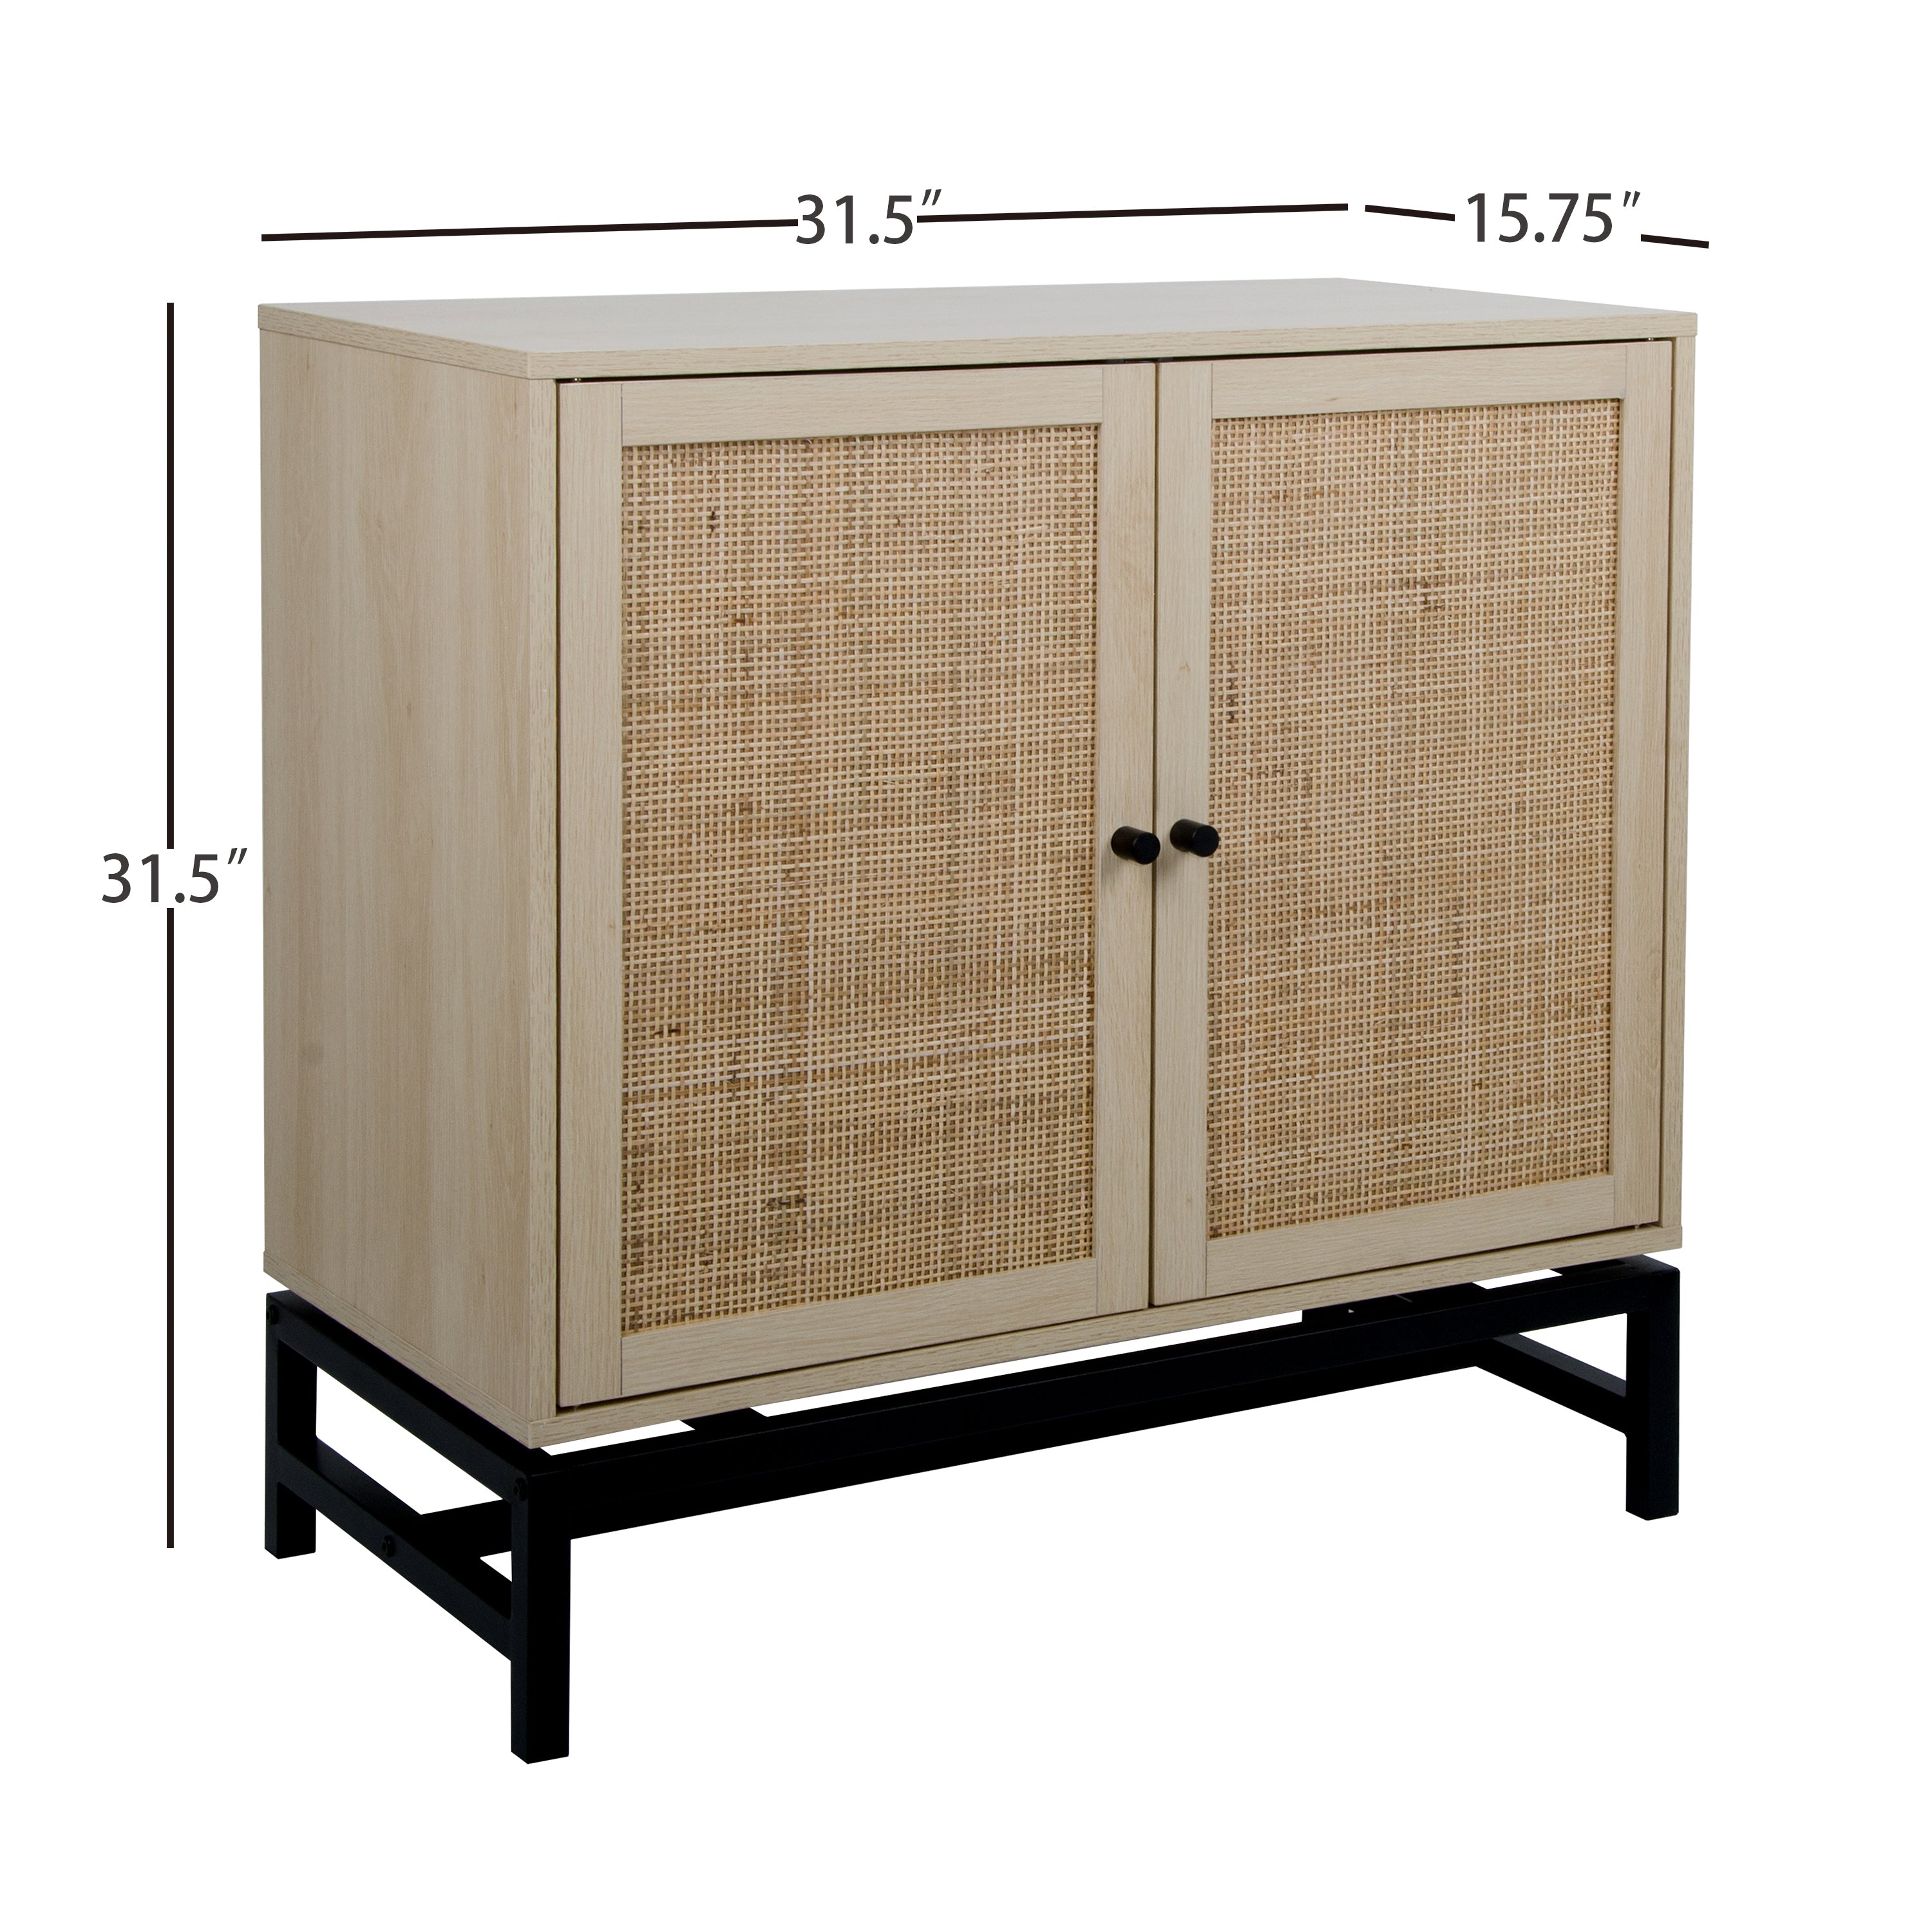 31.5" Natural rattan Accent Storage Cabinet with Black Metal Base